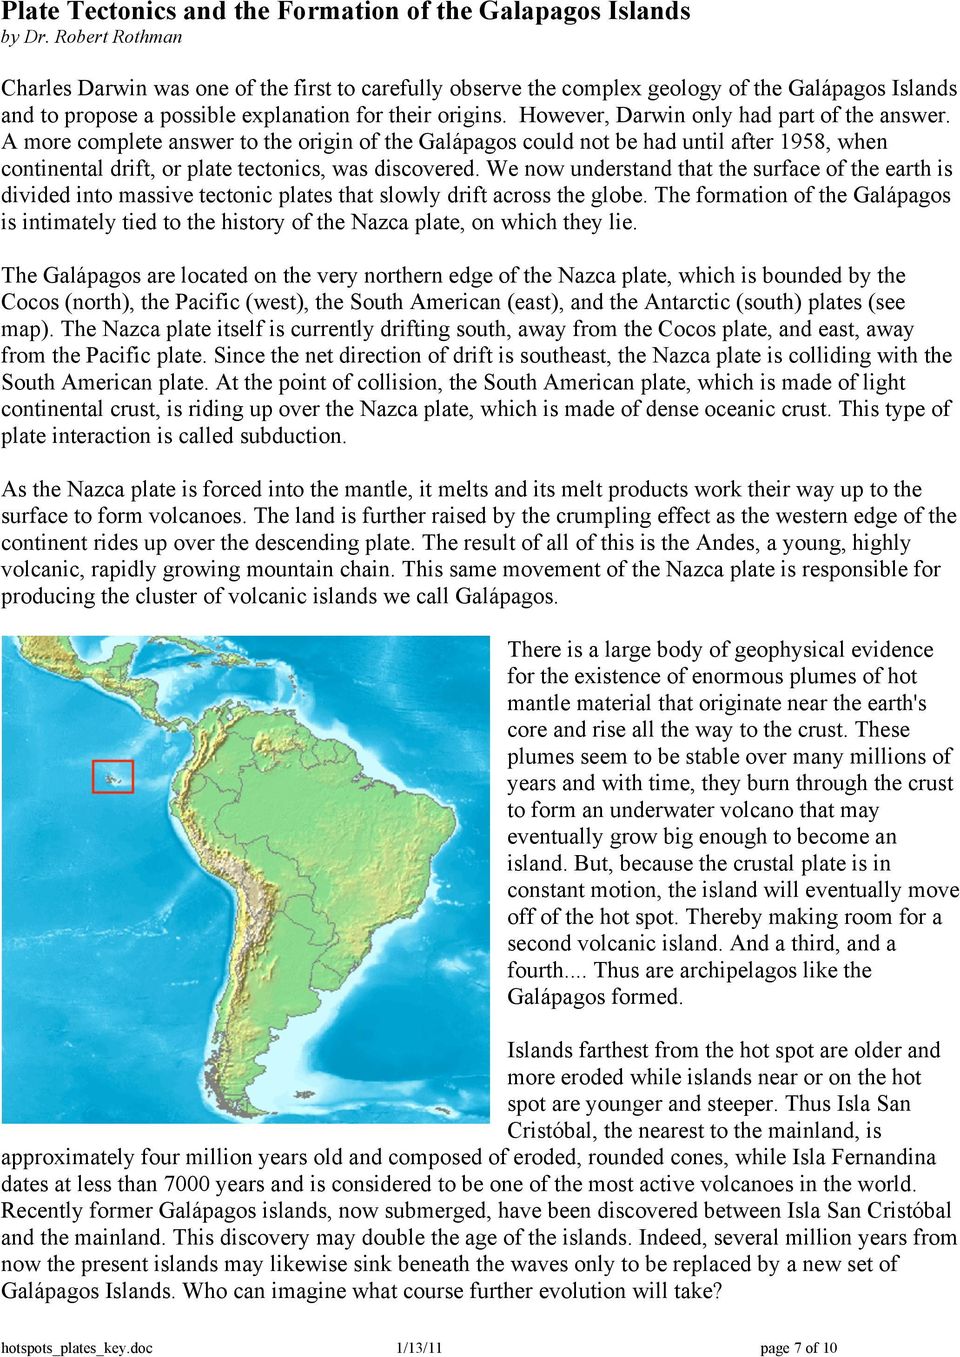 However, Darwin only had part of the answer. A more complete answer to the origin of the Galápagos could not be had until after 1958, when continental drift, or plate tectonics, was discovered.